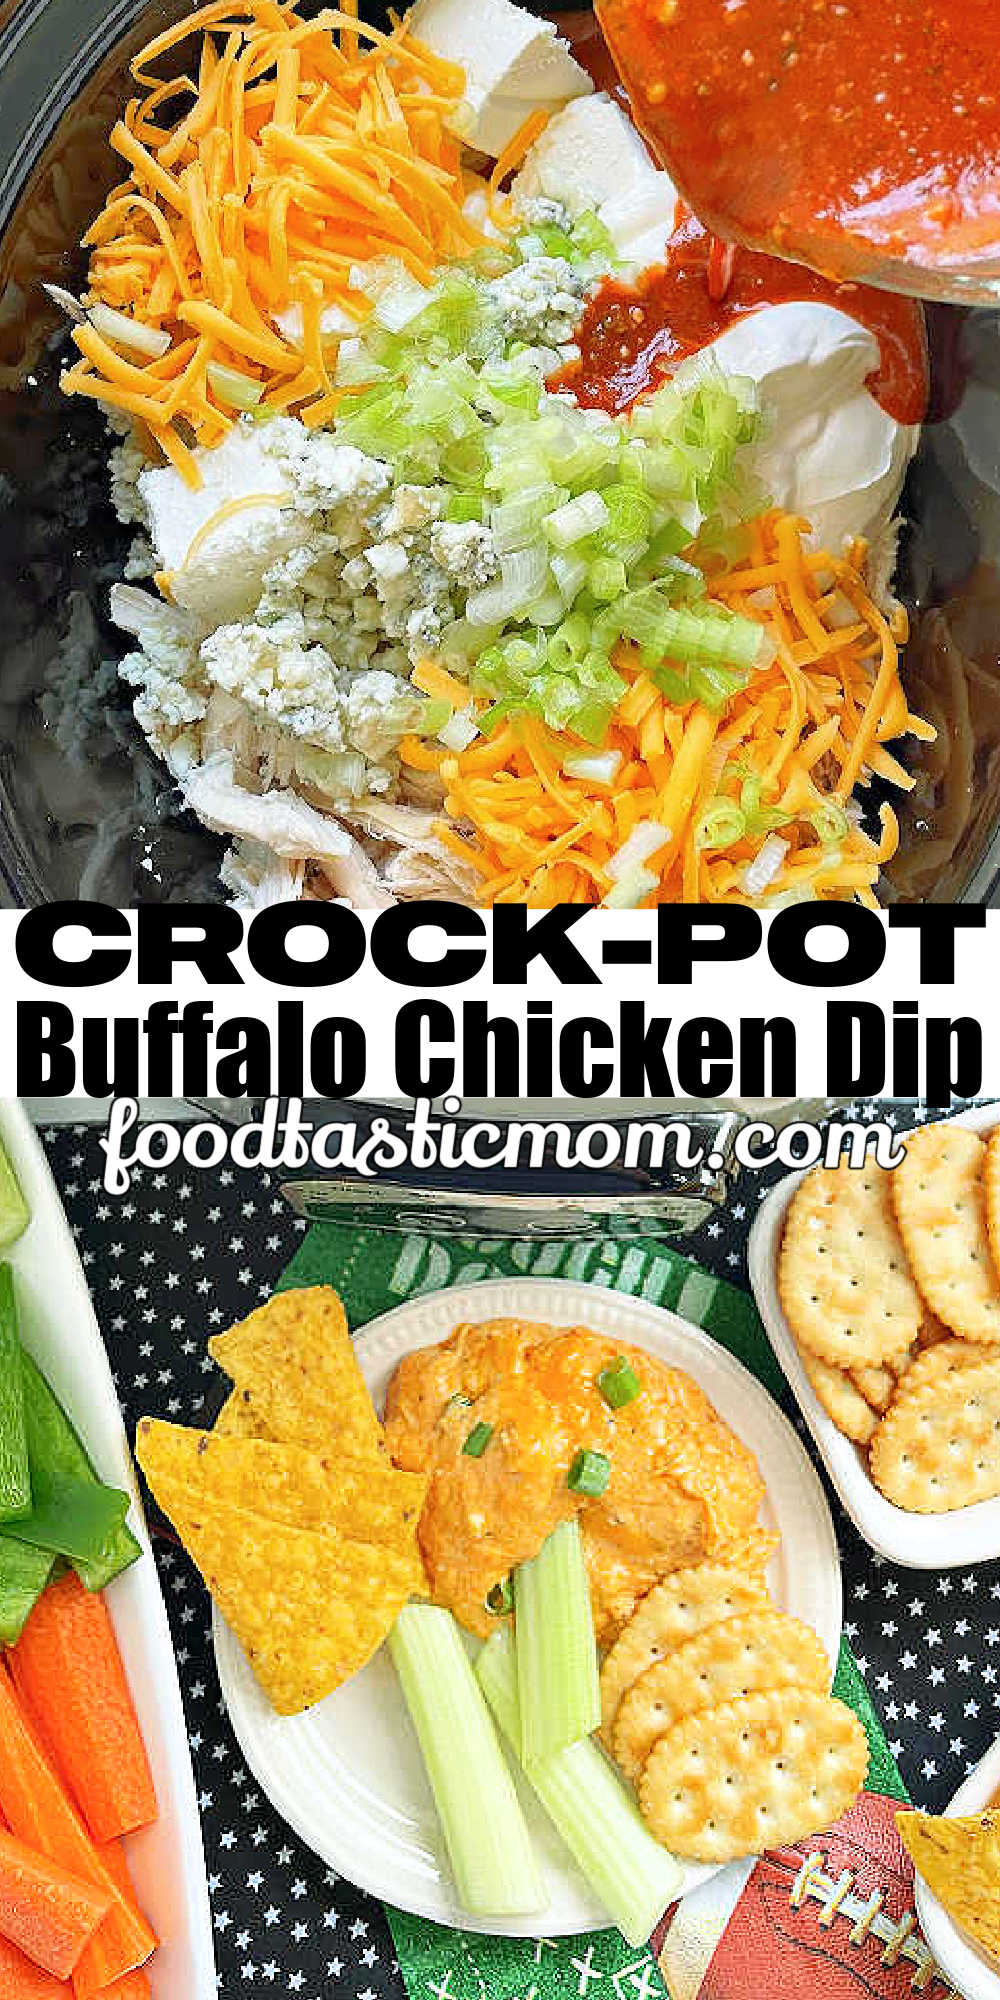 Crock Pot Buffalo Chicken Dip is perfect for game days or any celebration. Packed with flavor that everyone craves and it so simple to make! via @foodtasticmom